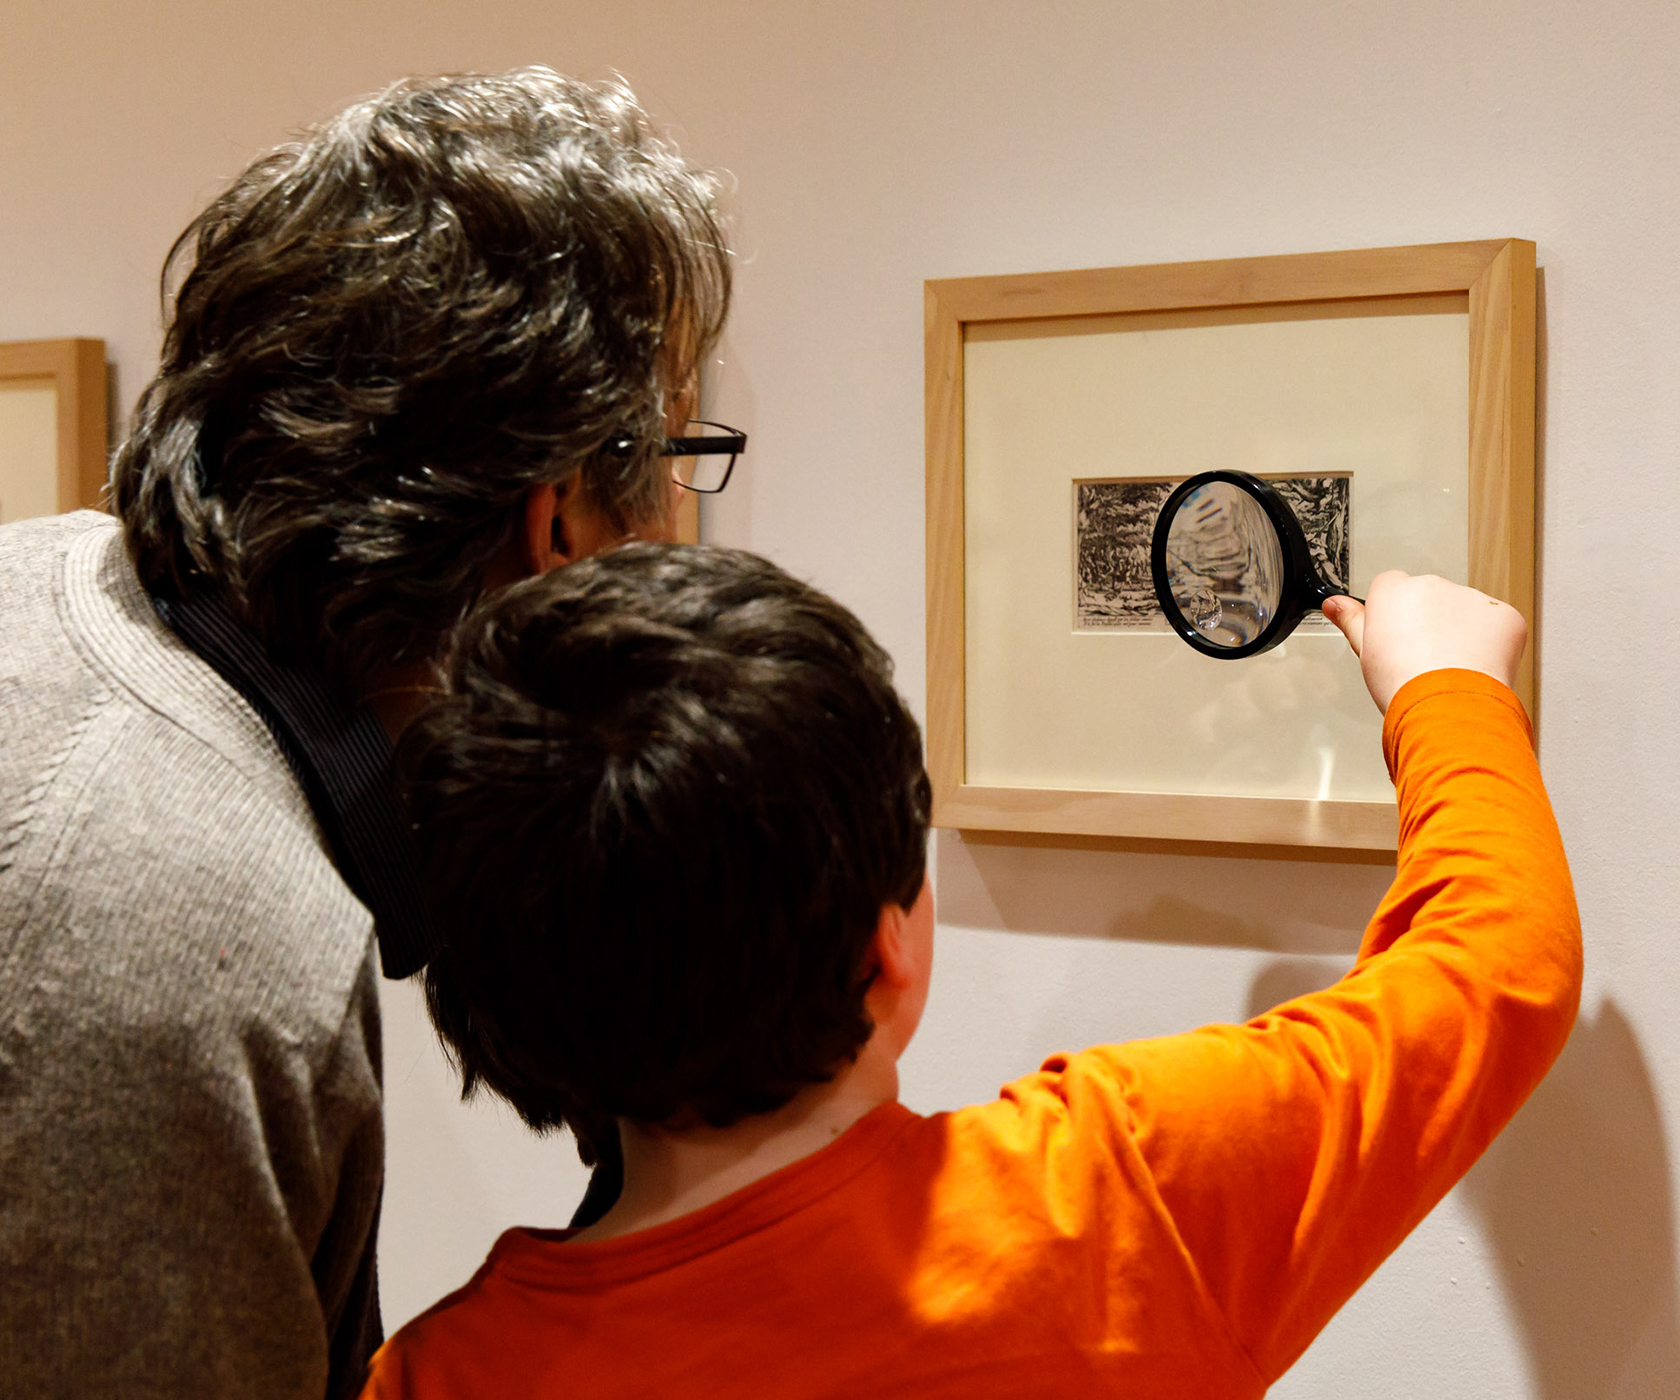 A man and boy look at a framed etching through a magnifying glass